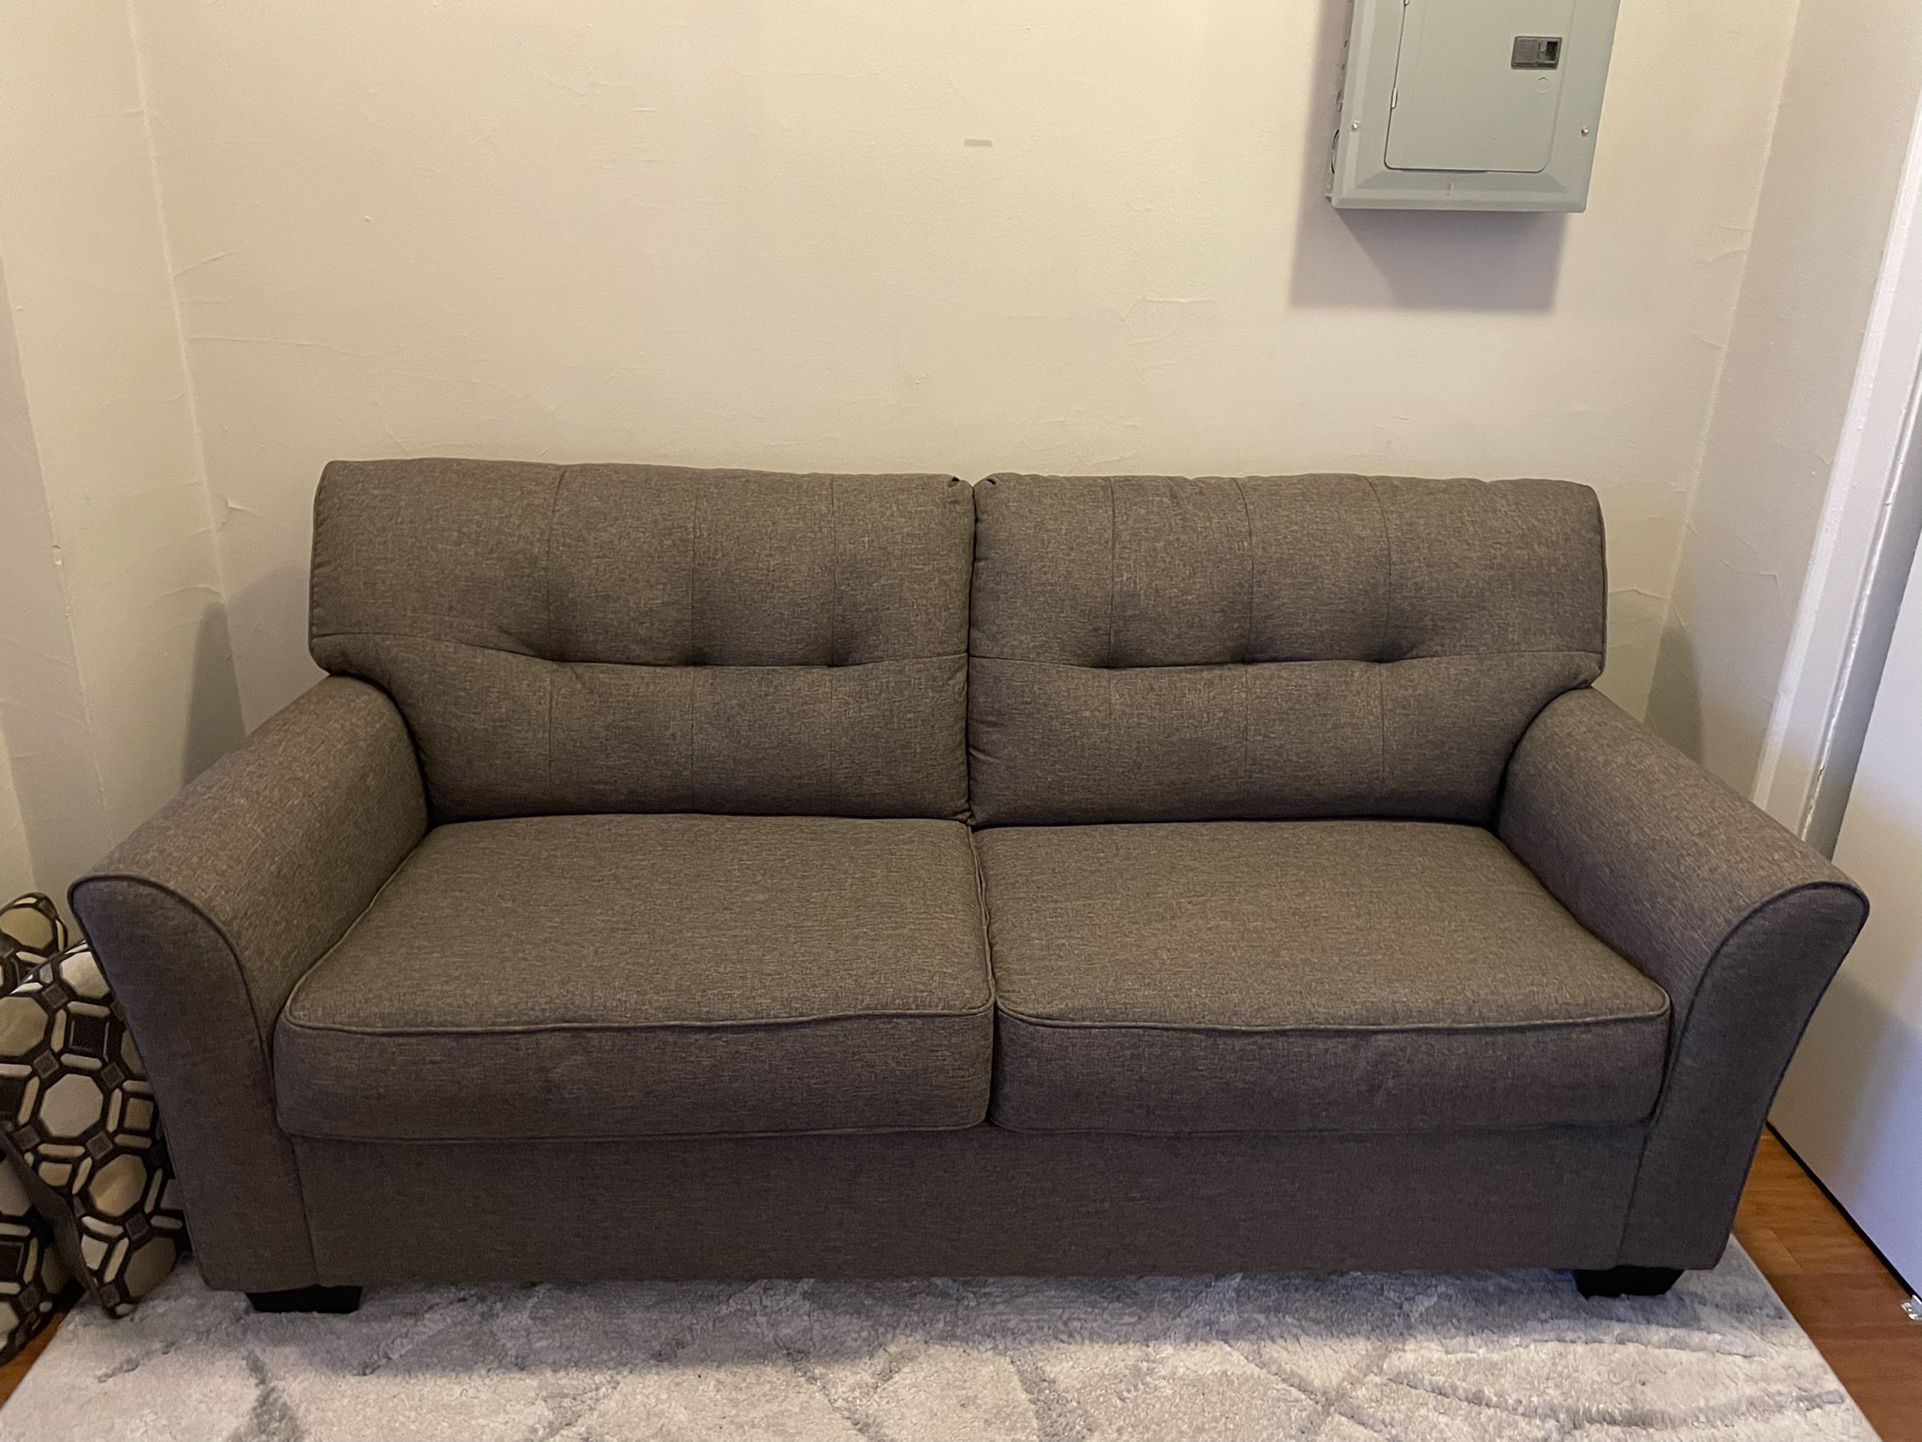 Fold Out Full-Size Couch